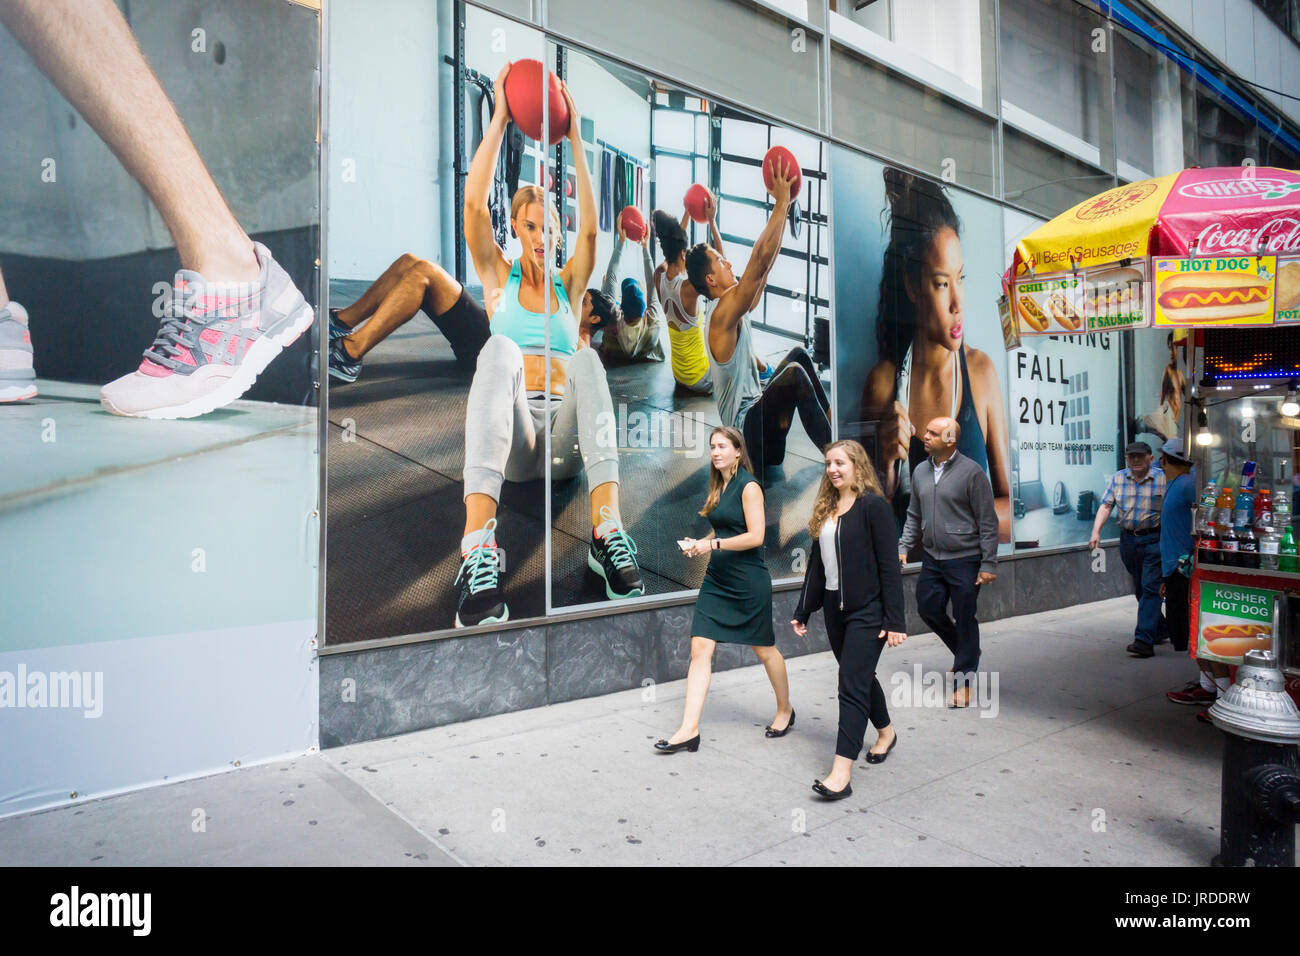 Colorful photographs decorate the under construction Asics store on Fifth Avenue in New York on Thursday, August 3, 2017. The stretch of Fifth Avenue in Midtown is becoming a 'Sneaker Row' as sneaker brands lease space to open flagship stores. Under Armour and Nike are working on stores besides Asics and Adidas has already opened an enormous space.  (© Richard B. Levine) Stock Photo